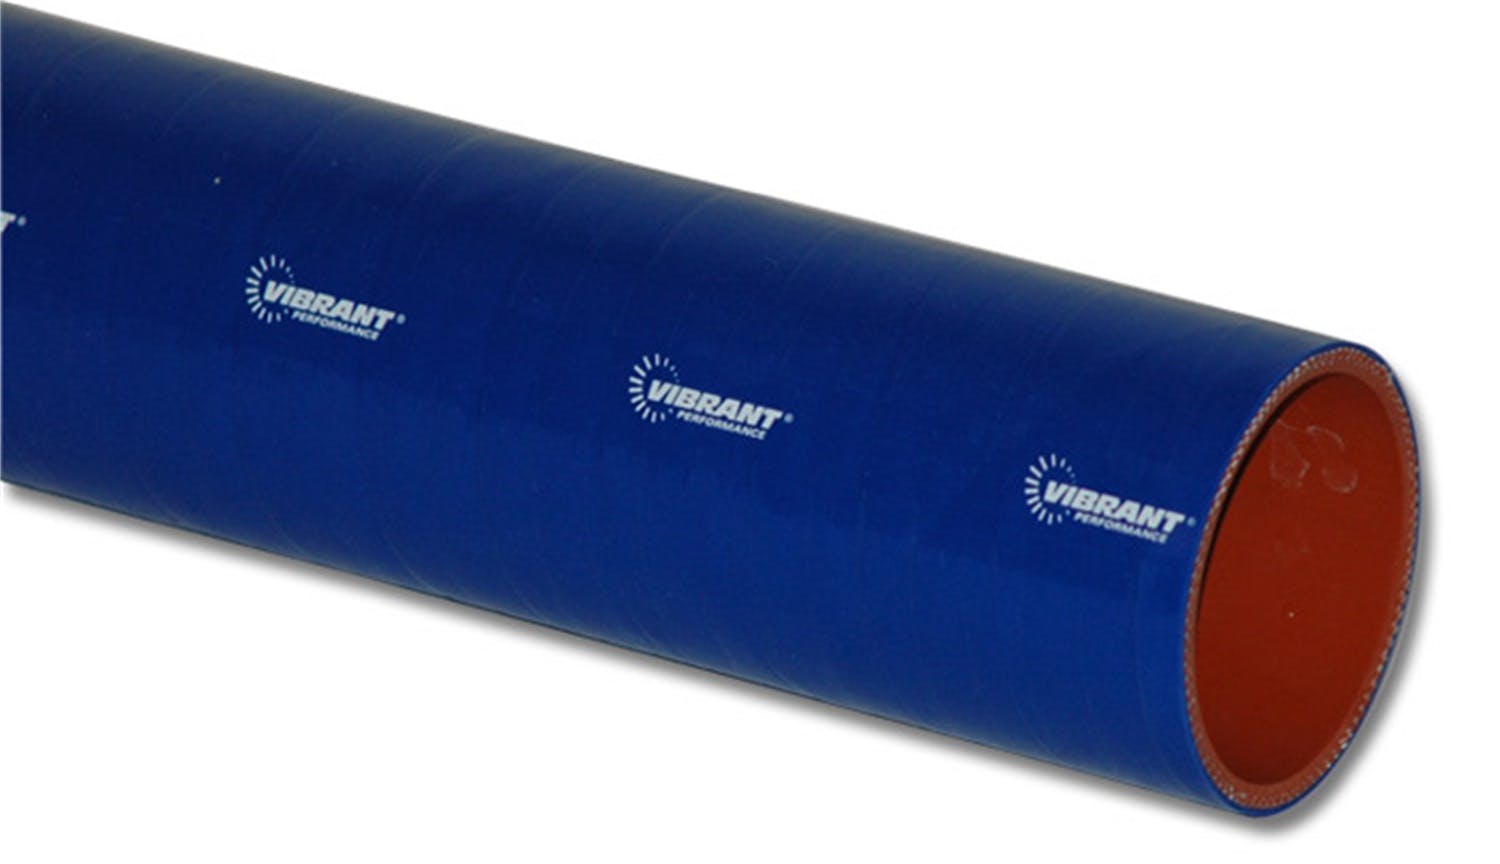 Vibrant Performance 27131B 4 Ply Silicone Sleeve, 2.75 inch I.D. x 12 inch Long - Blue